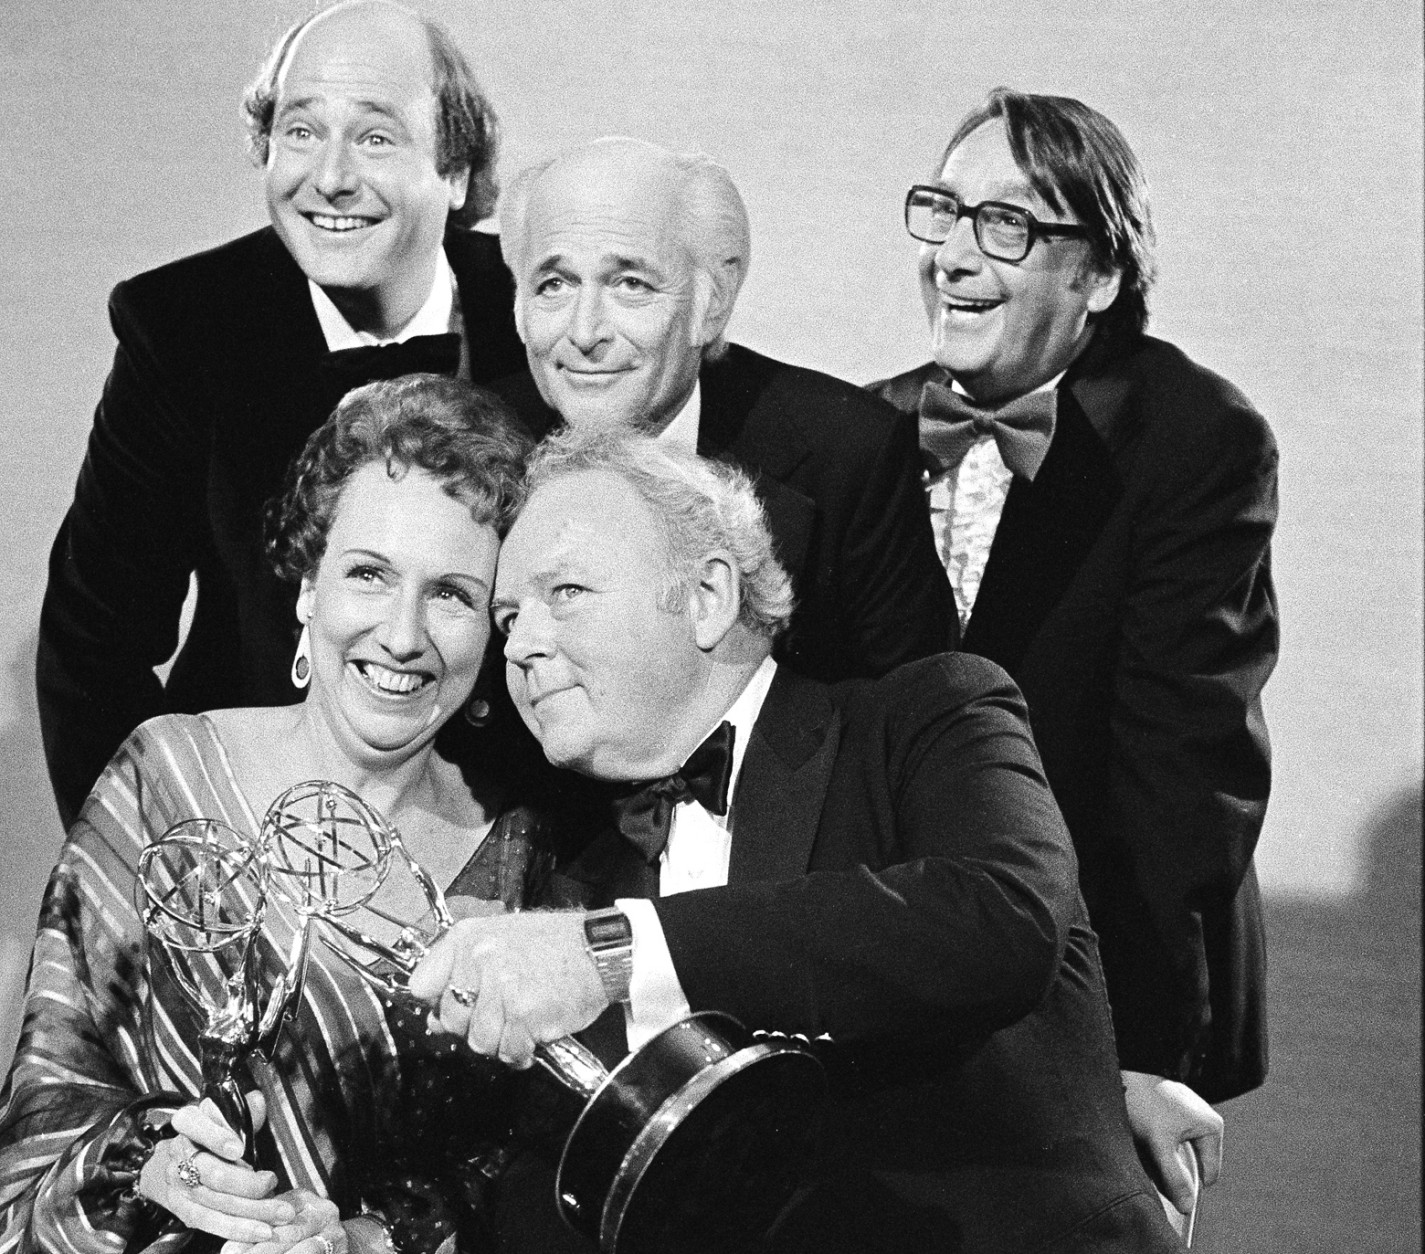 Actors Jean Stapleton, seated, left, and Carroll O'Connor, seated, right, hold their Emmys after receiving them in Hollywood, Calif., Sept. 18, 1978.  At rear, from left to right are Rob Reiner, who won an Emmy for supporting actor in the same series; Norman Lear, producer of the show; and executive producer Mort Lachman.  (AP Photo)